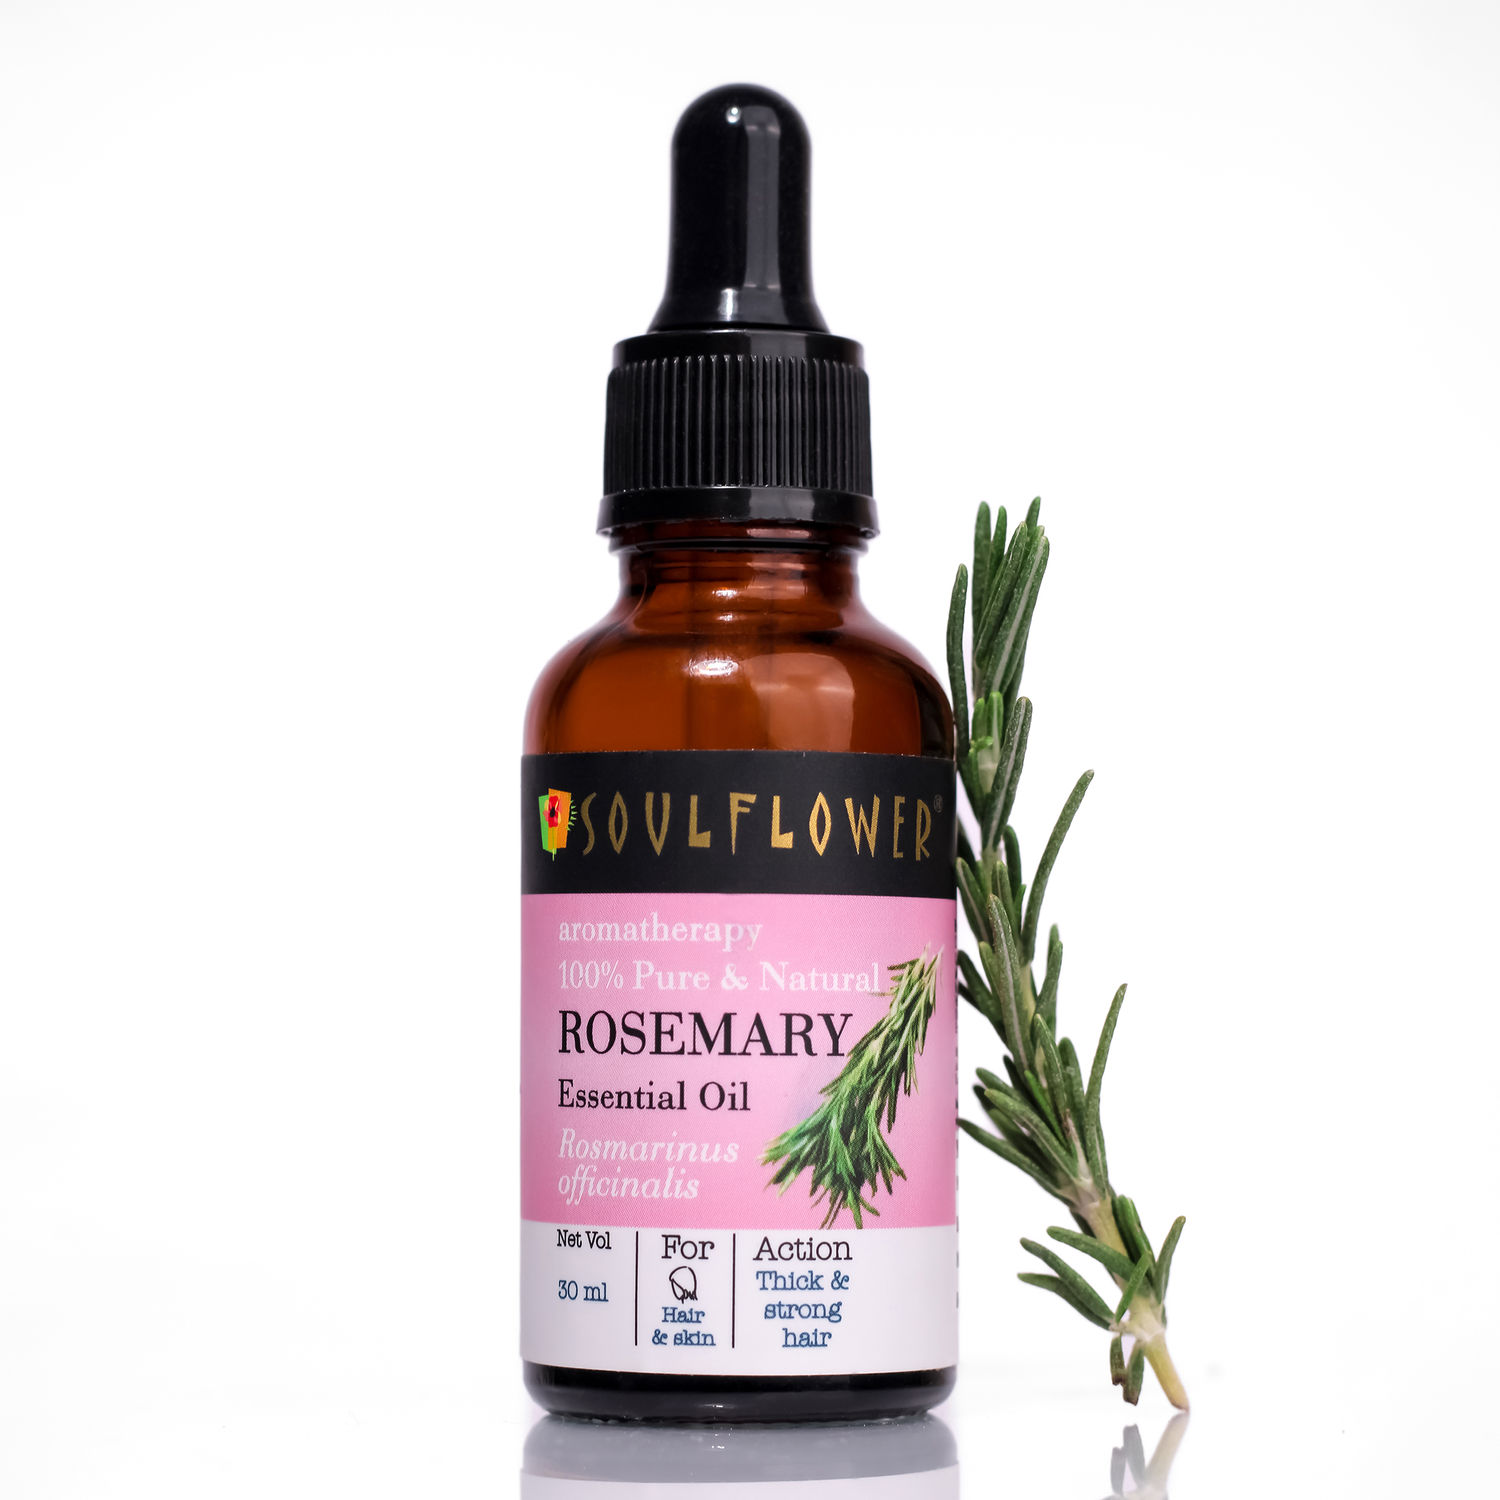 Buy Soulflower Rosemary Essential Oil for Hair Growth, Hair Fall Control and Nourishment, Skin Care | Clinically Tested & Ecocert Certified Organic 100% Pure, Natural, Undiluted | 15ml - Purplle